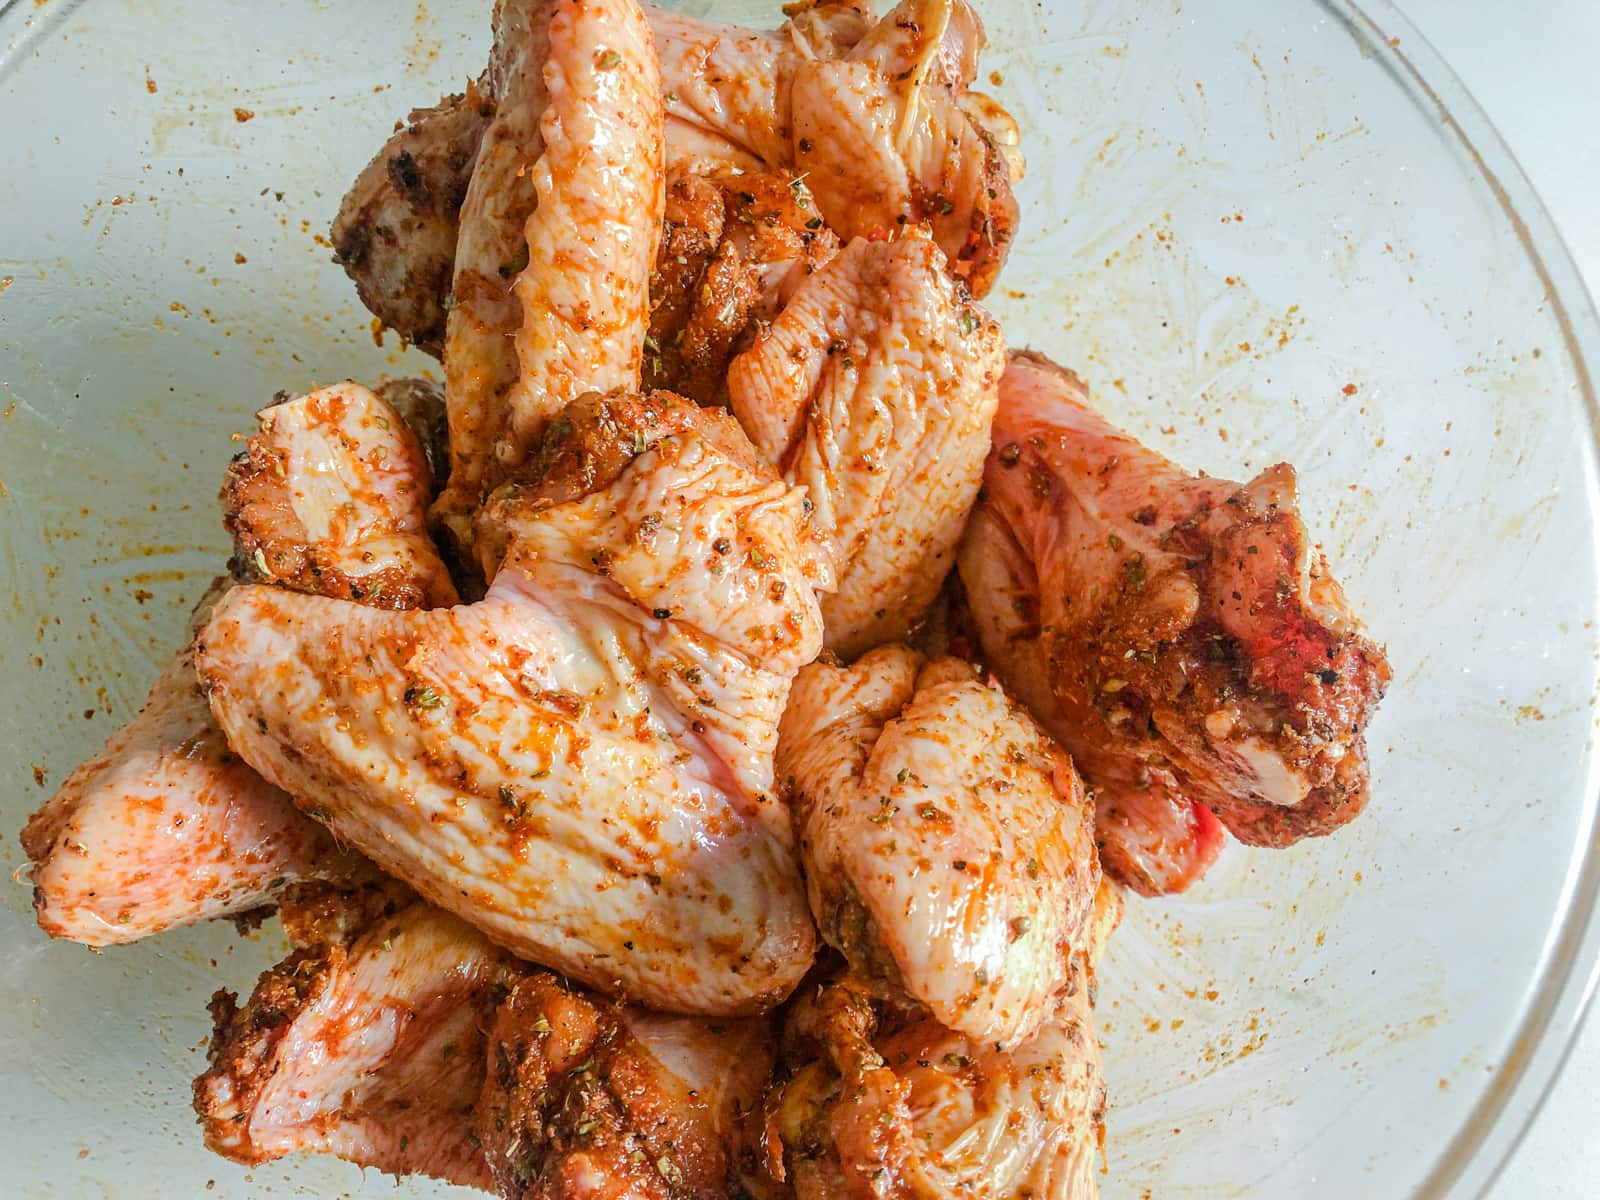 Chicken wings coated with oil and spices.